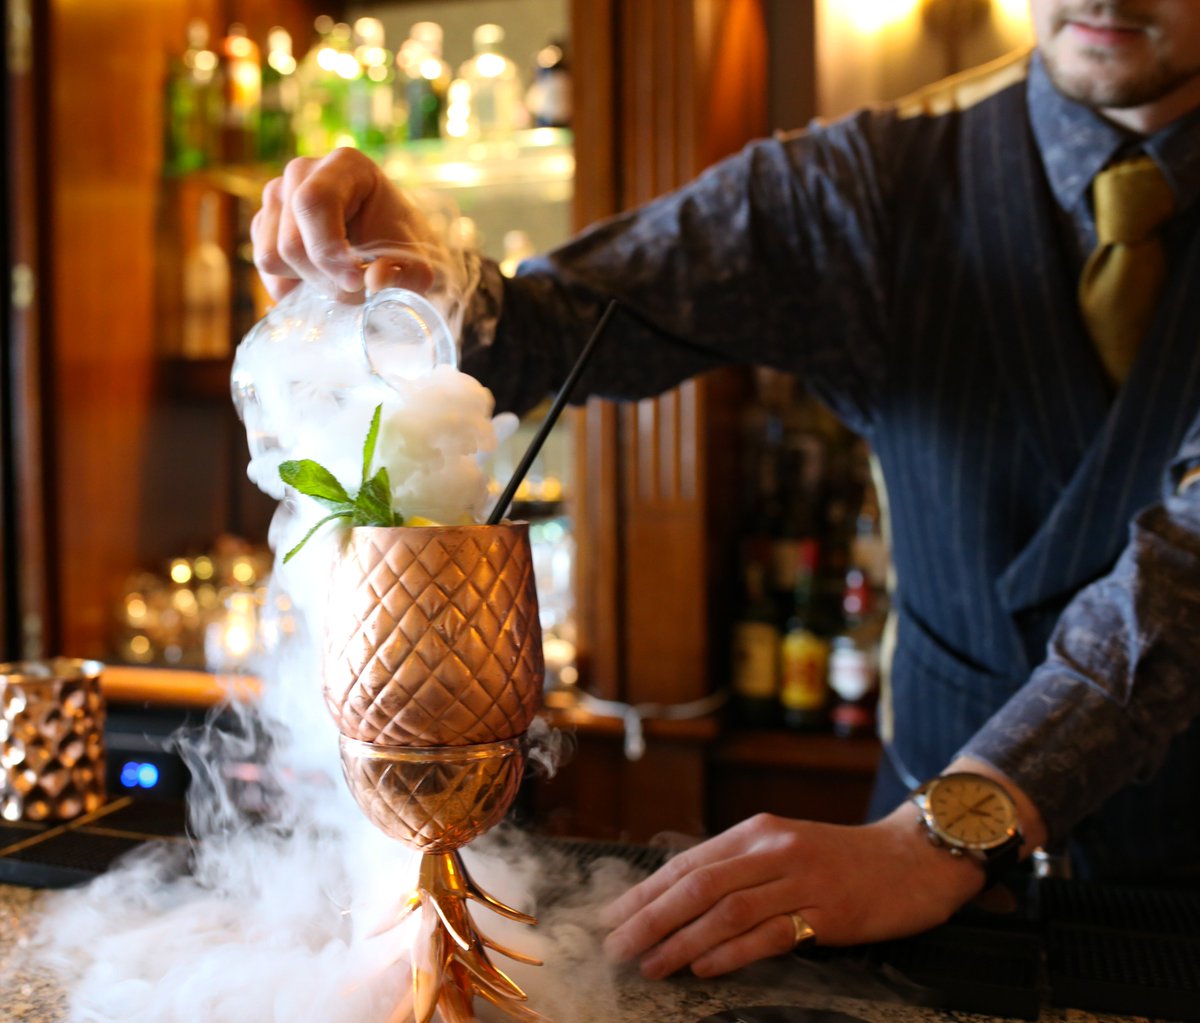 Are you intrigued by the concoctions created by our cocktail wizards at The Grand Brighton? We can arrange a cocktail masterclass just for you... 🍹🧙‍♂️🤪#cocktailmasterclass #corporateevents #cocktails #luxuryhotels #Brighton #Brightonevents